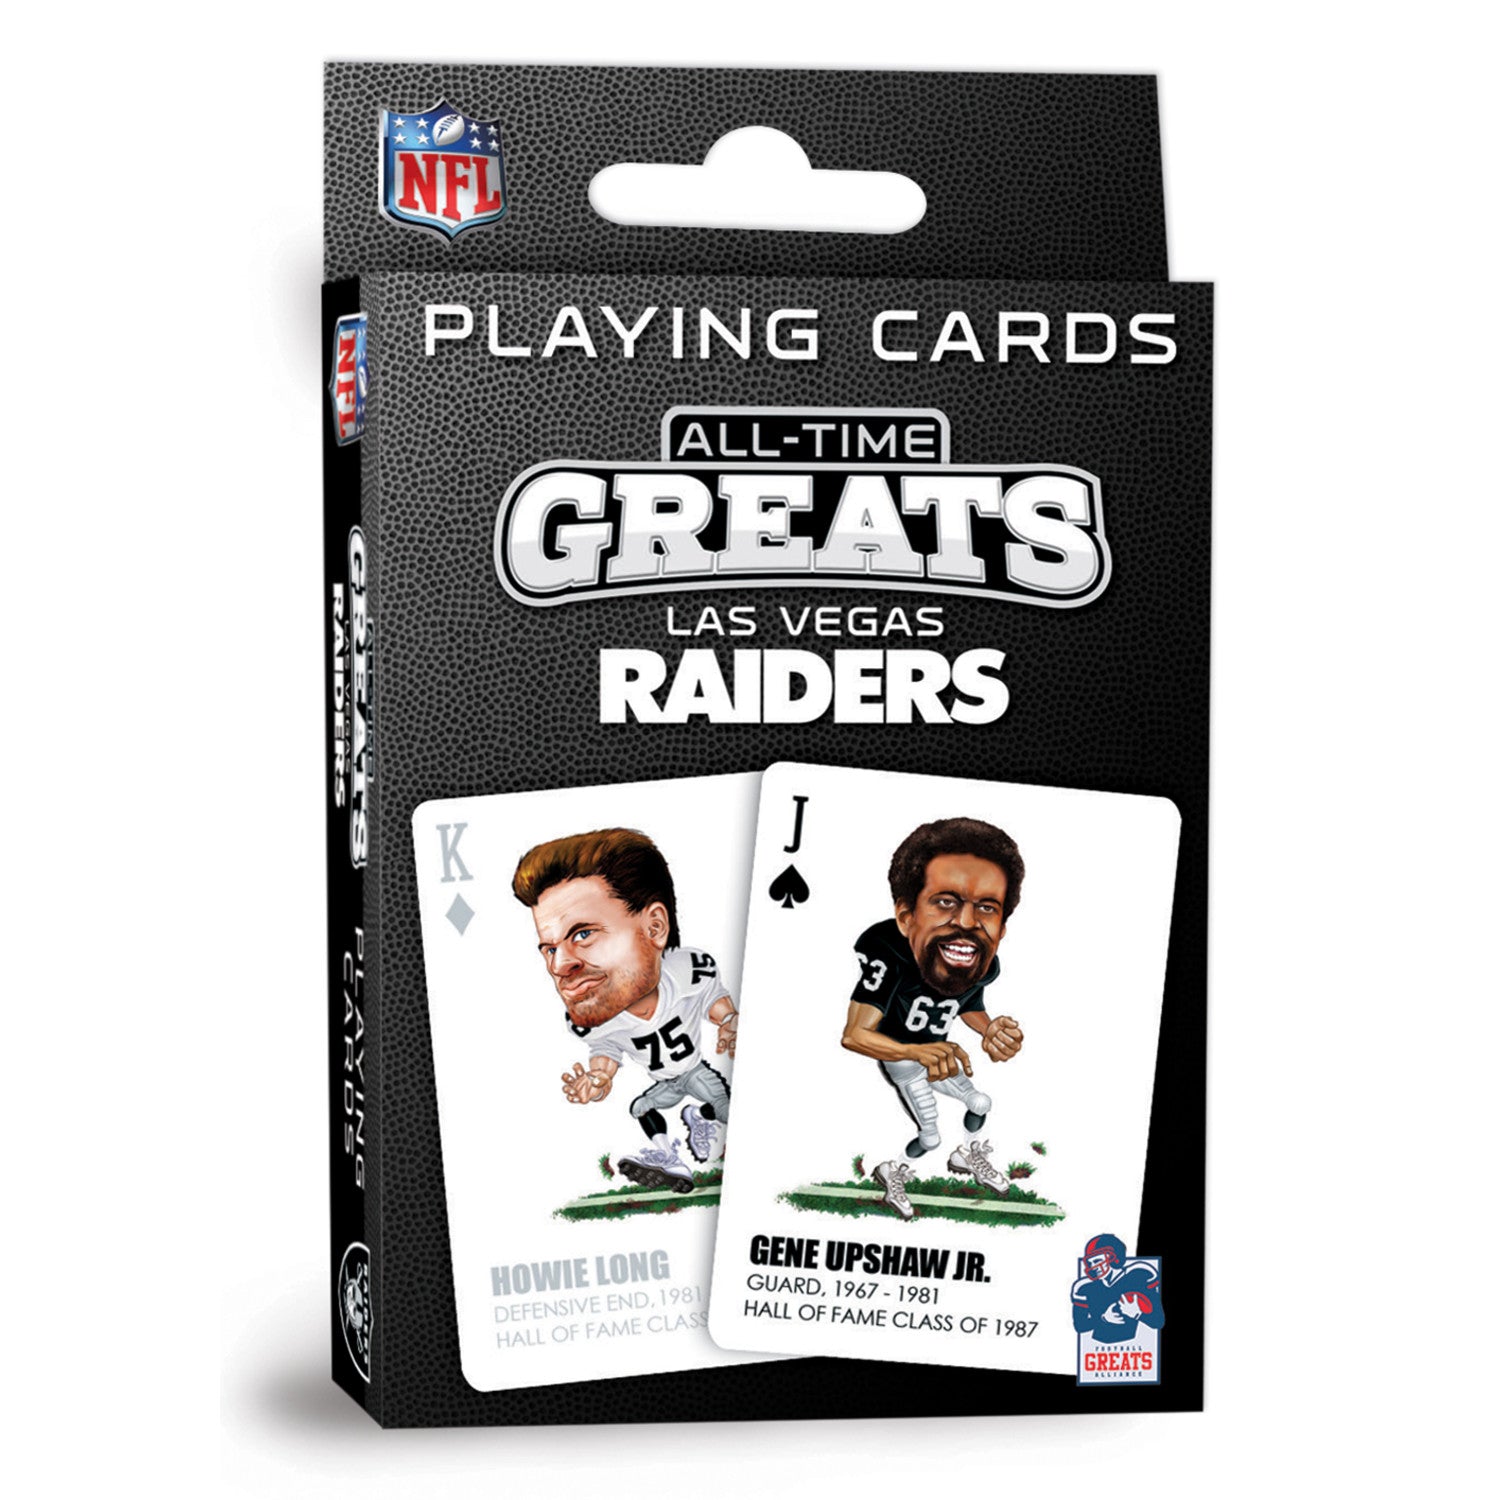 Las Vegas Raiders All-Time Greats Playing Cards - 54 Card Deck